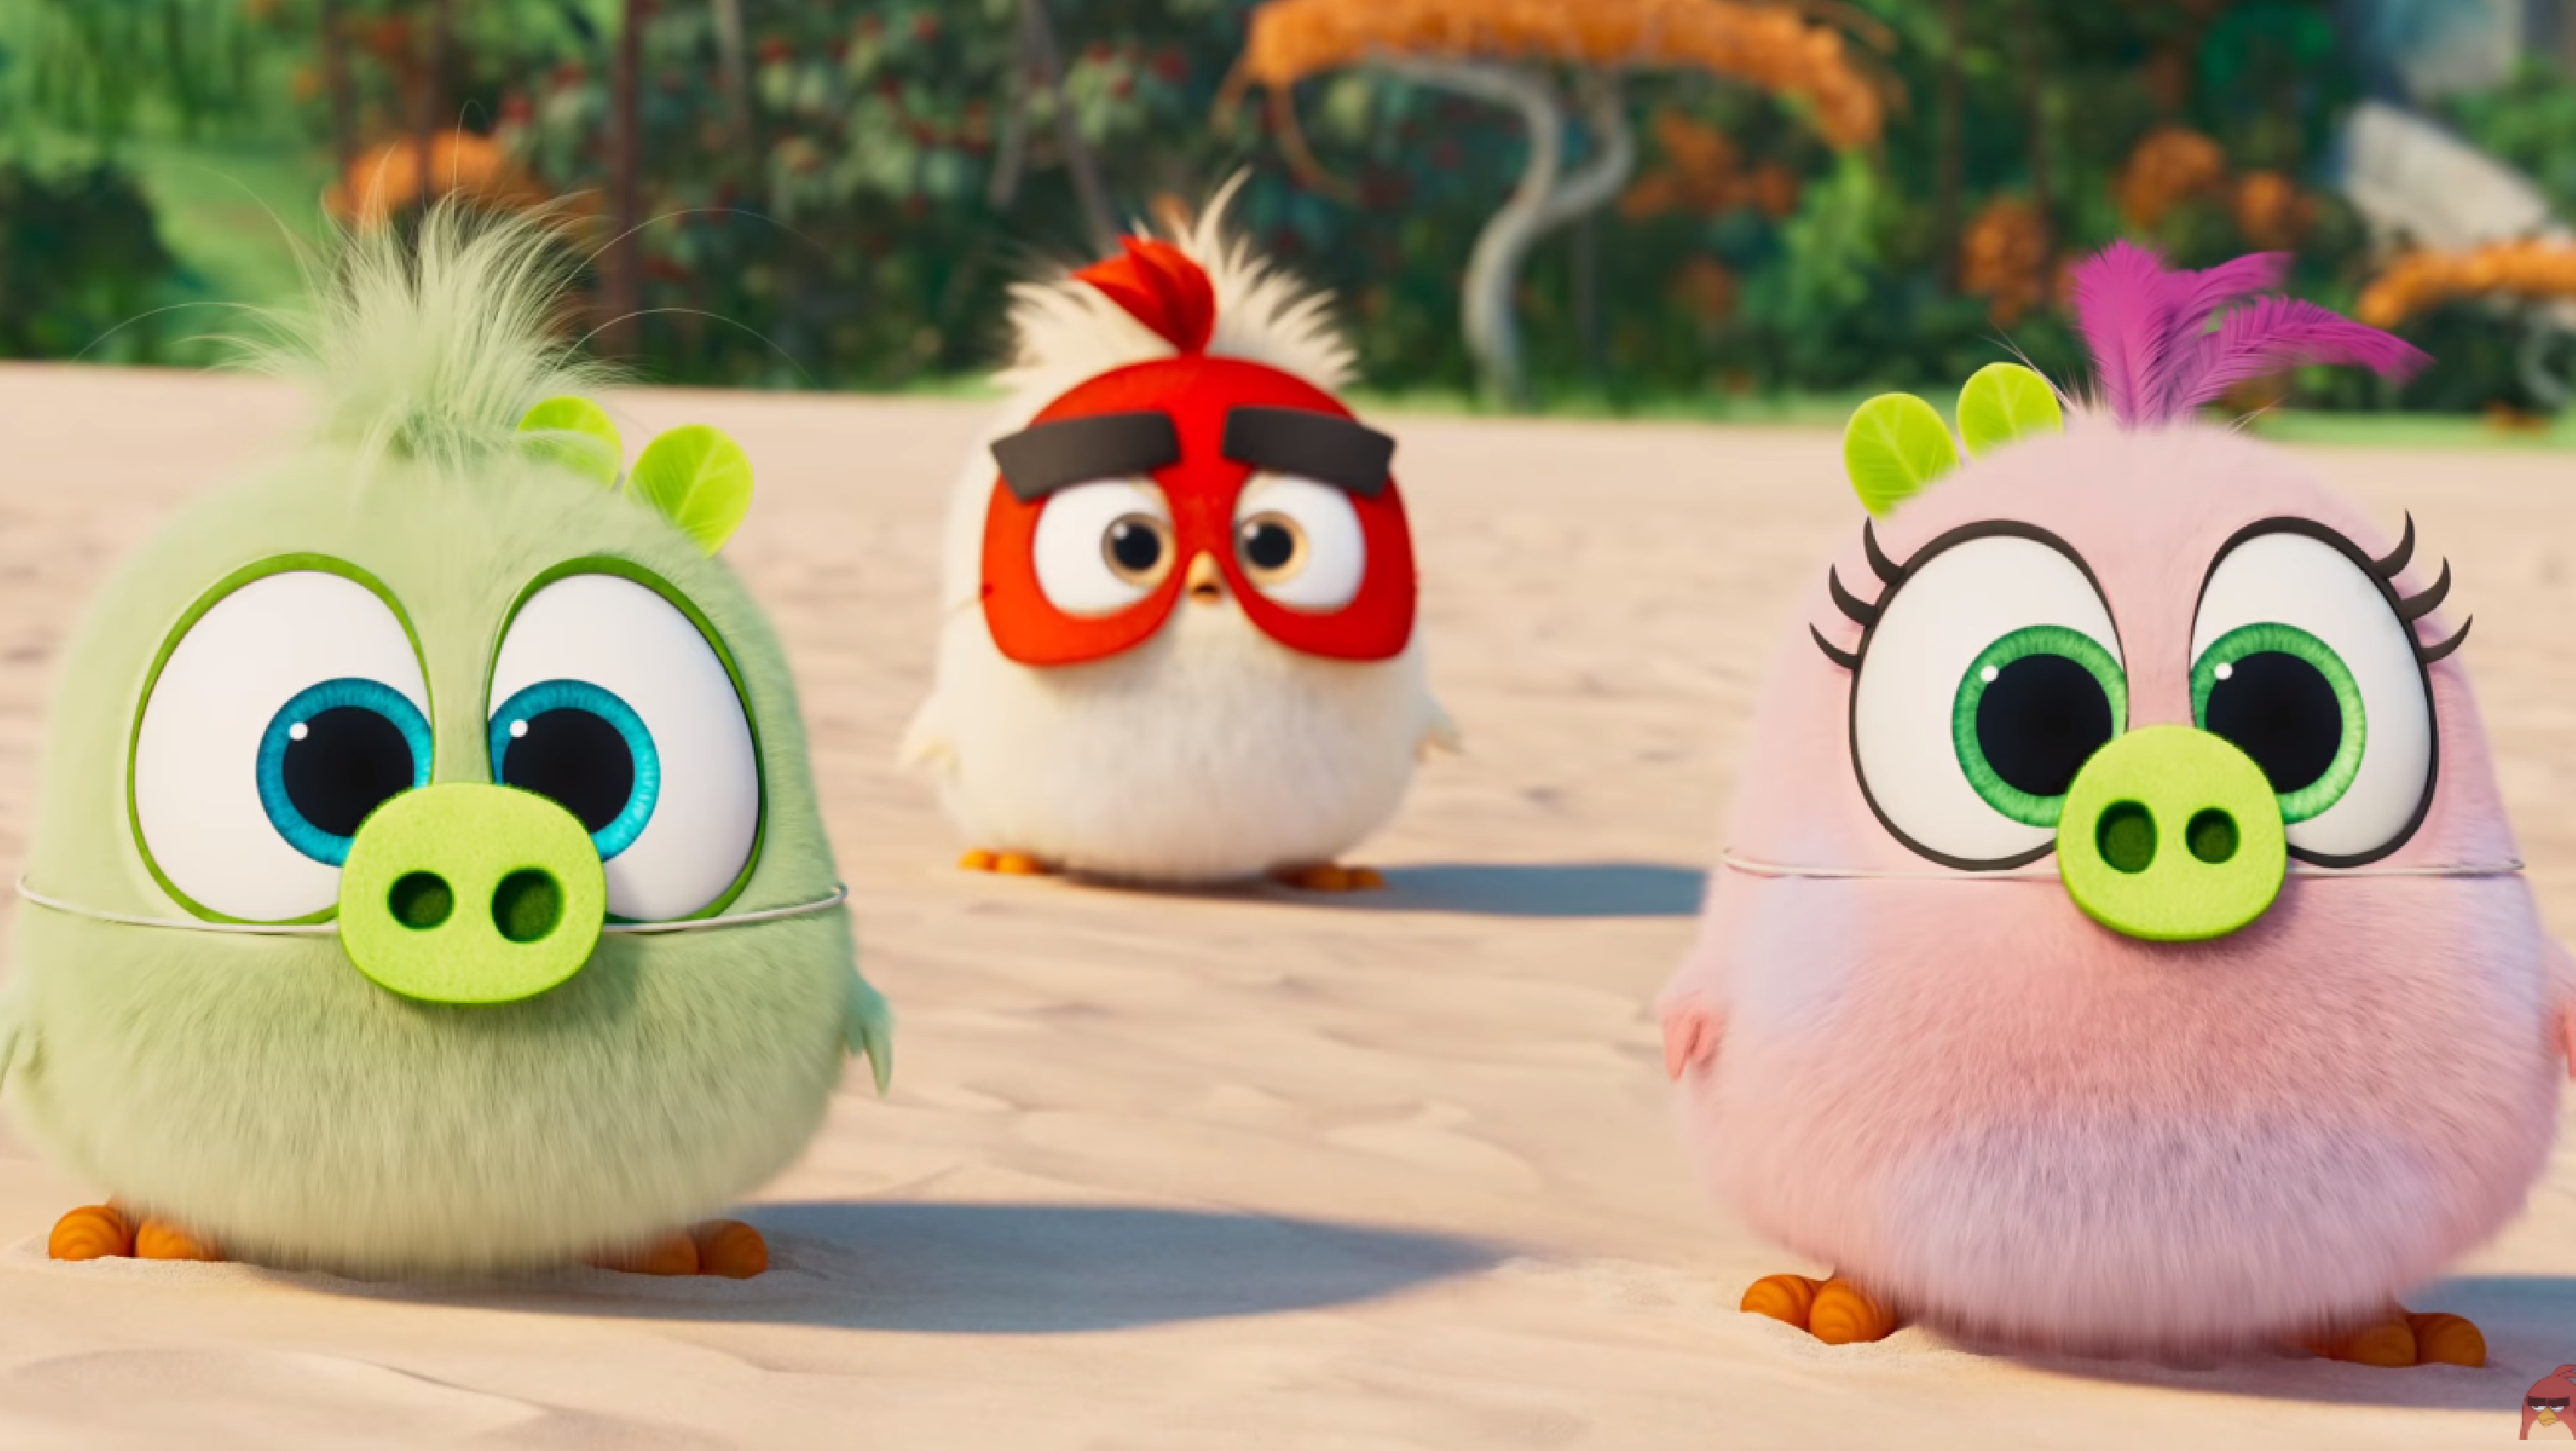 http://www.sideralweb.com/wp-content/uploads/2019/02/Angry-Birds-2-01.png